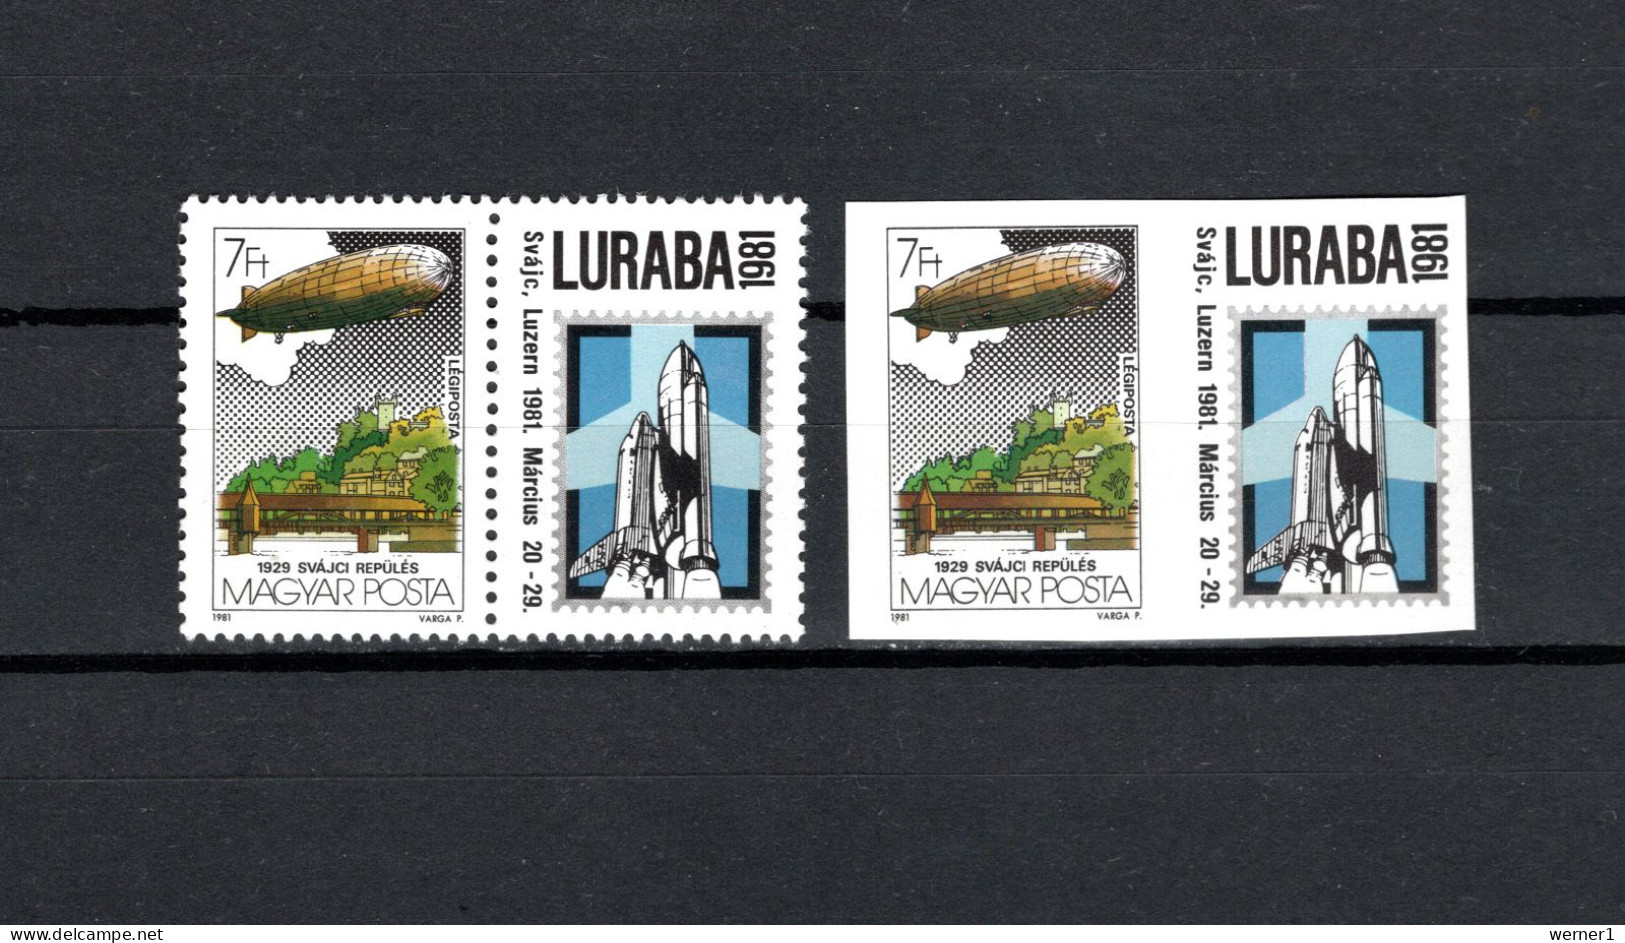 Hungary 1981 Space, Zeppelin 7Ft Stamp Perf. And Imperf. With Luraba Label MNH - Europa